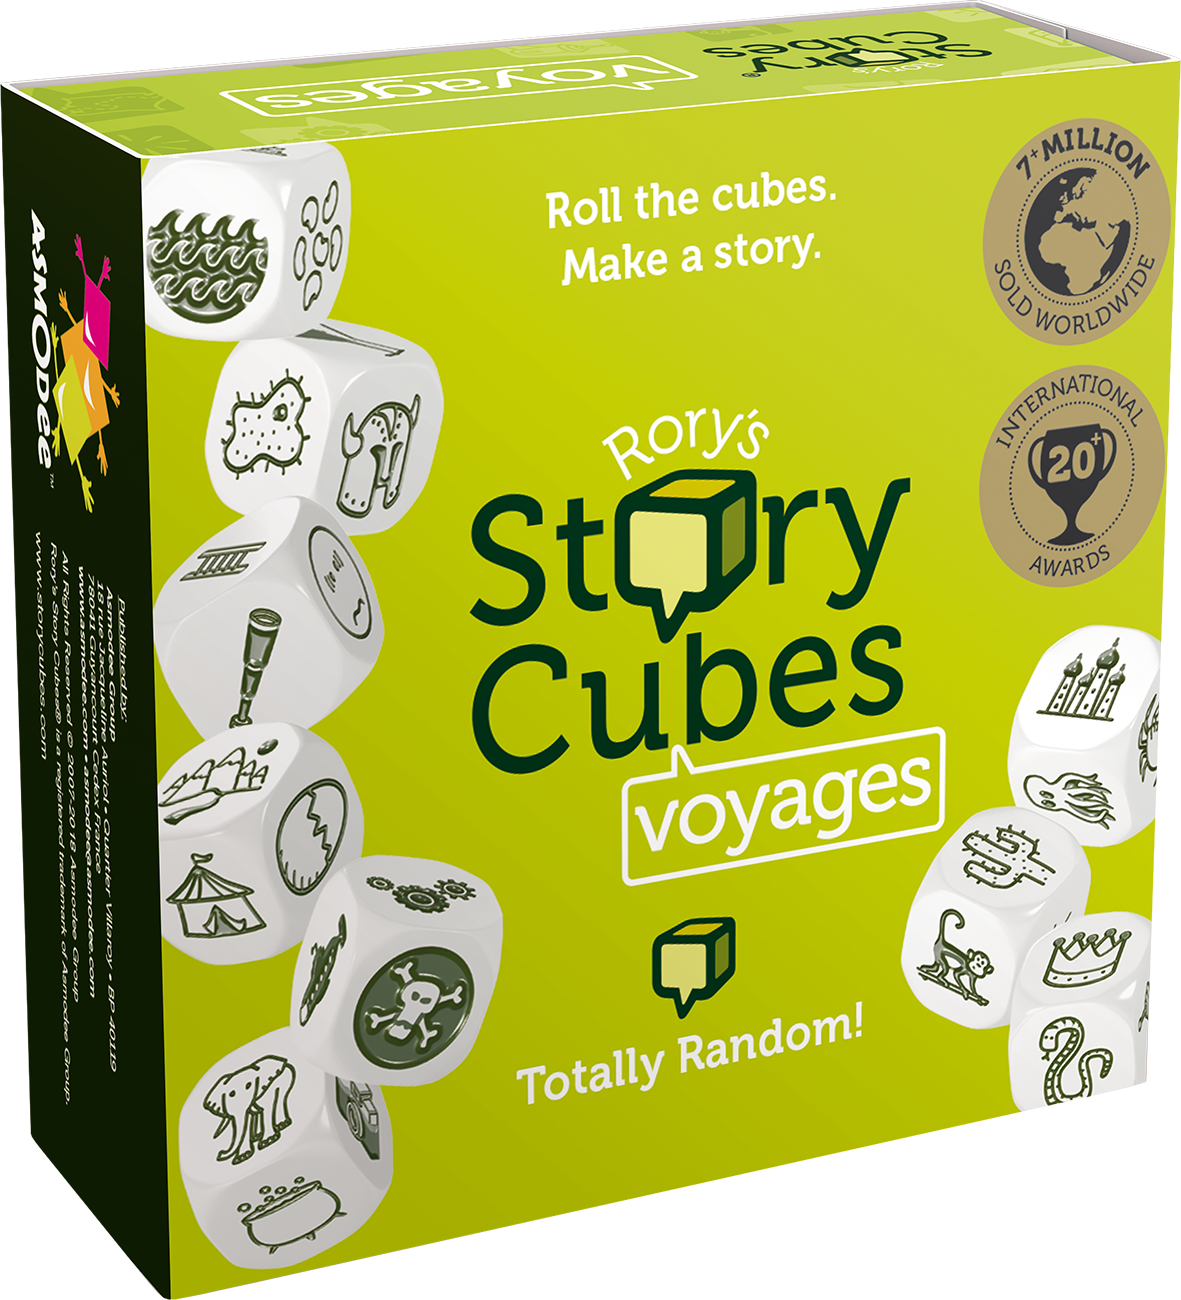 Rory's Story Cubes Voyages (Box)